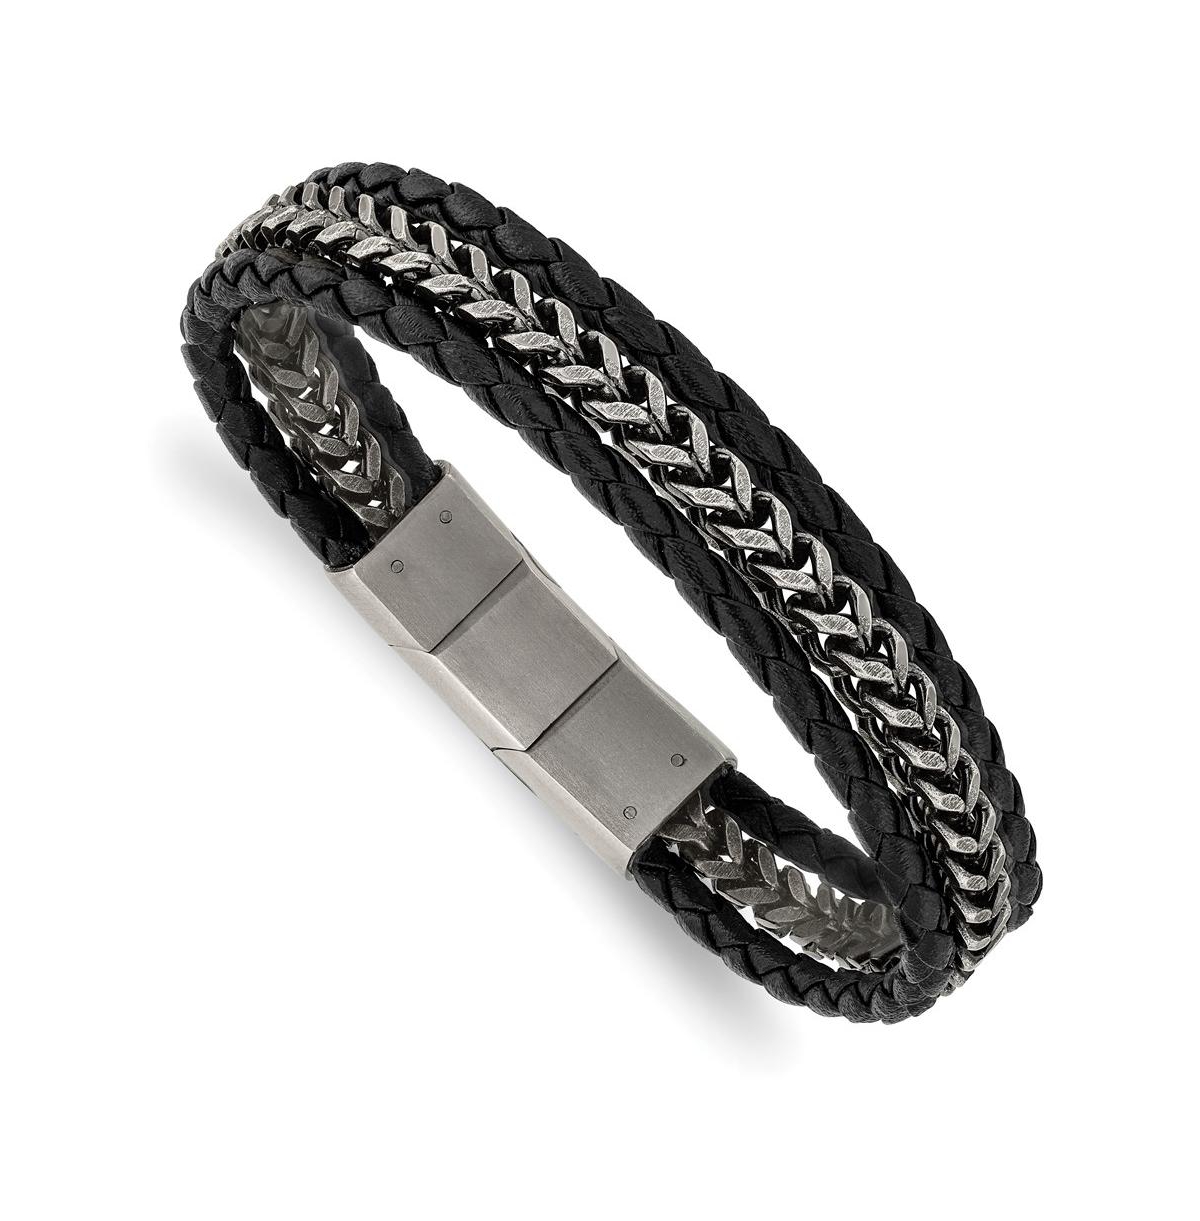 Stainless Steel Brushed Chain Black Leather Bracelet - Black